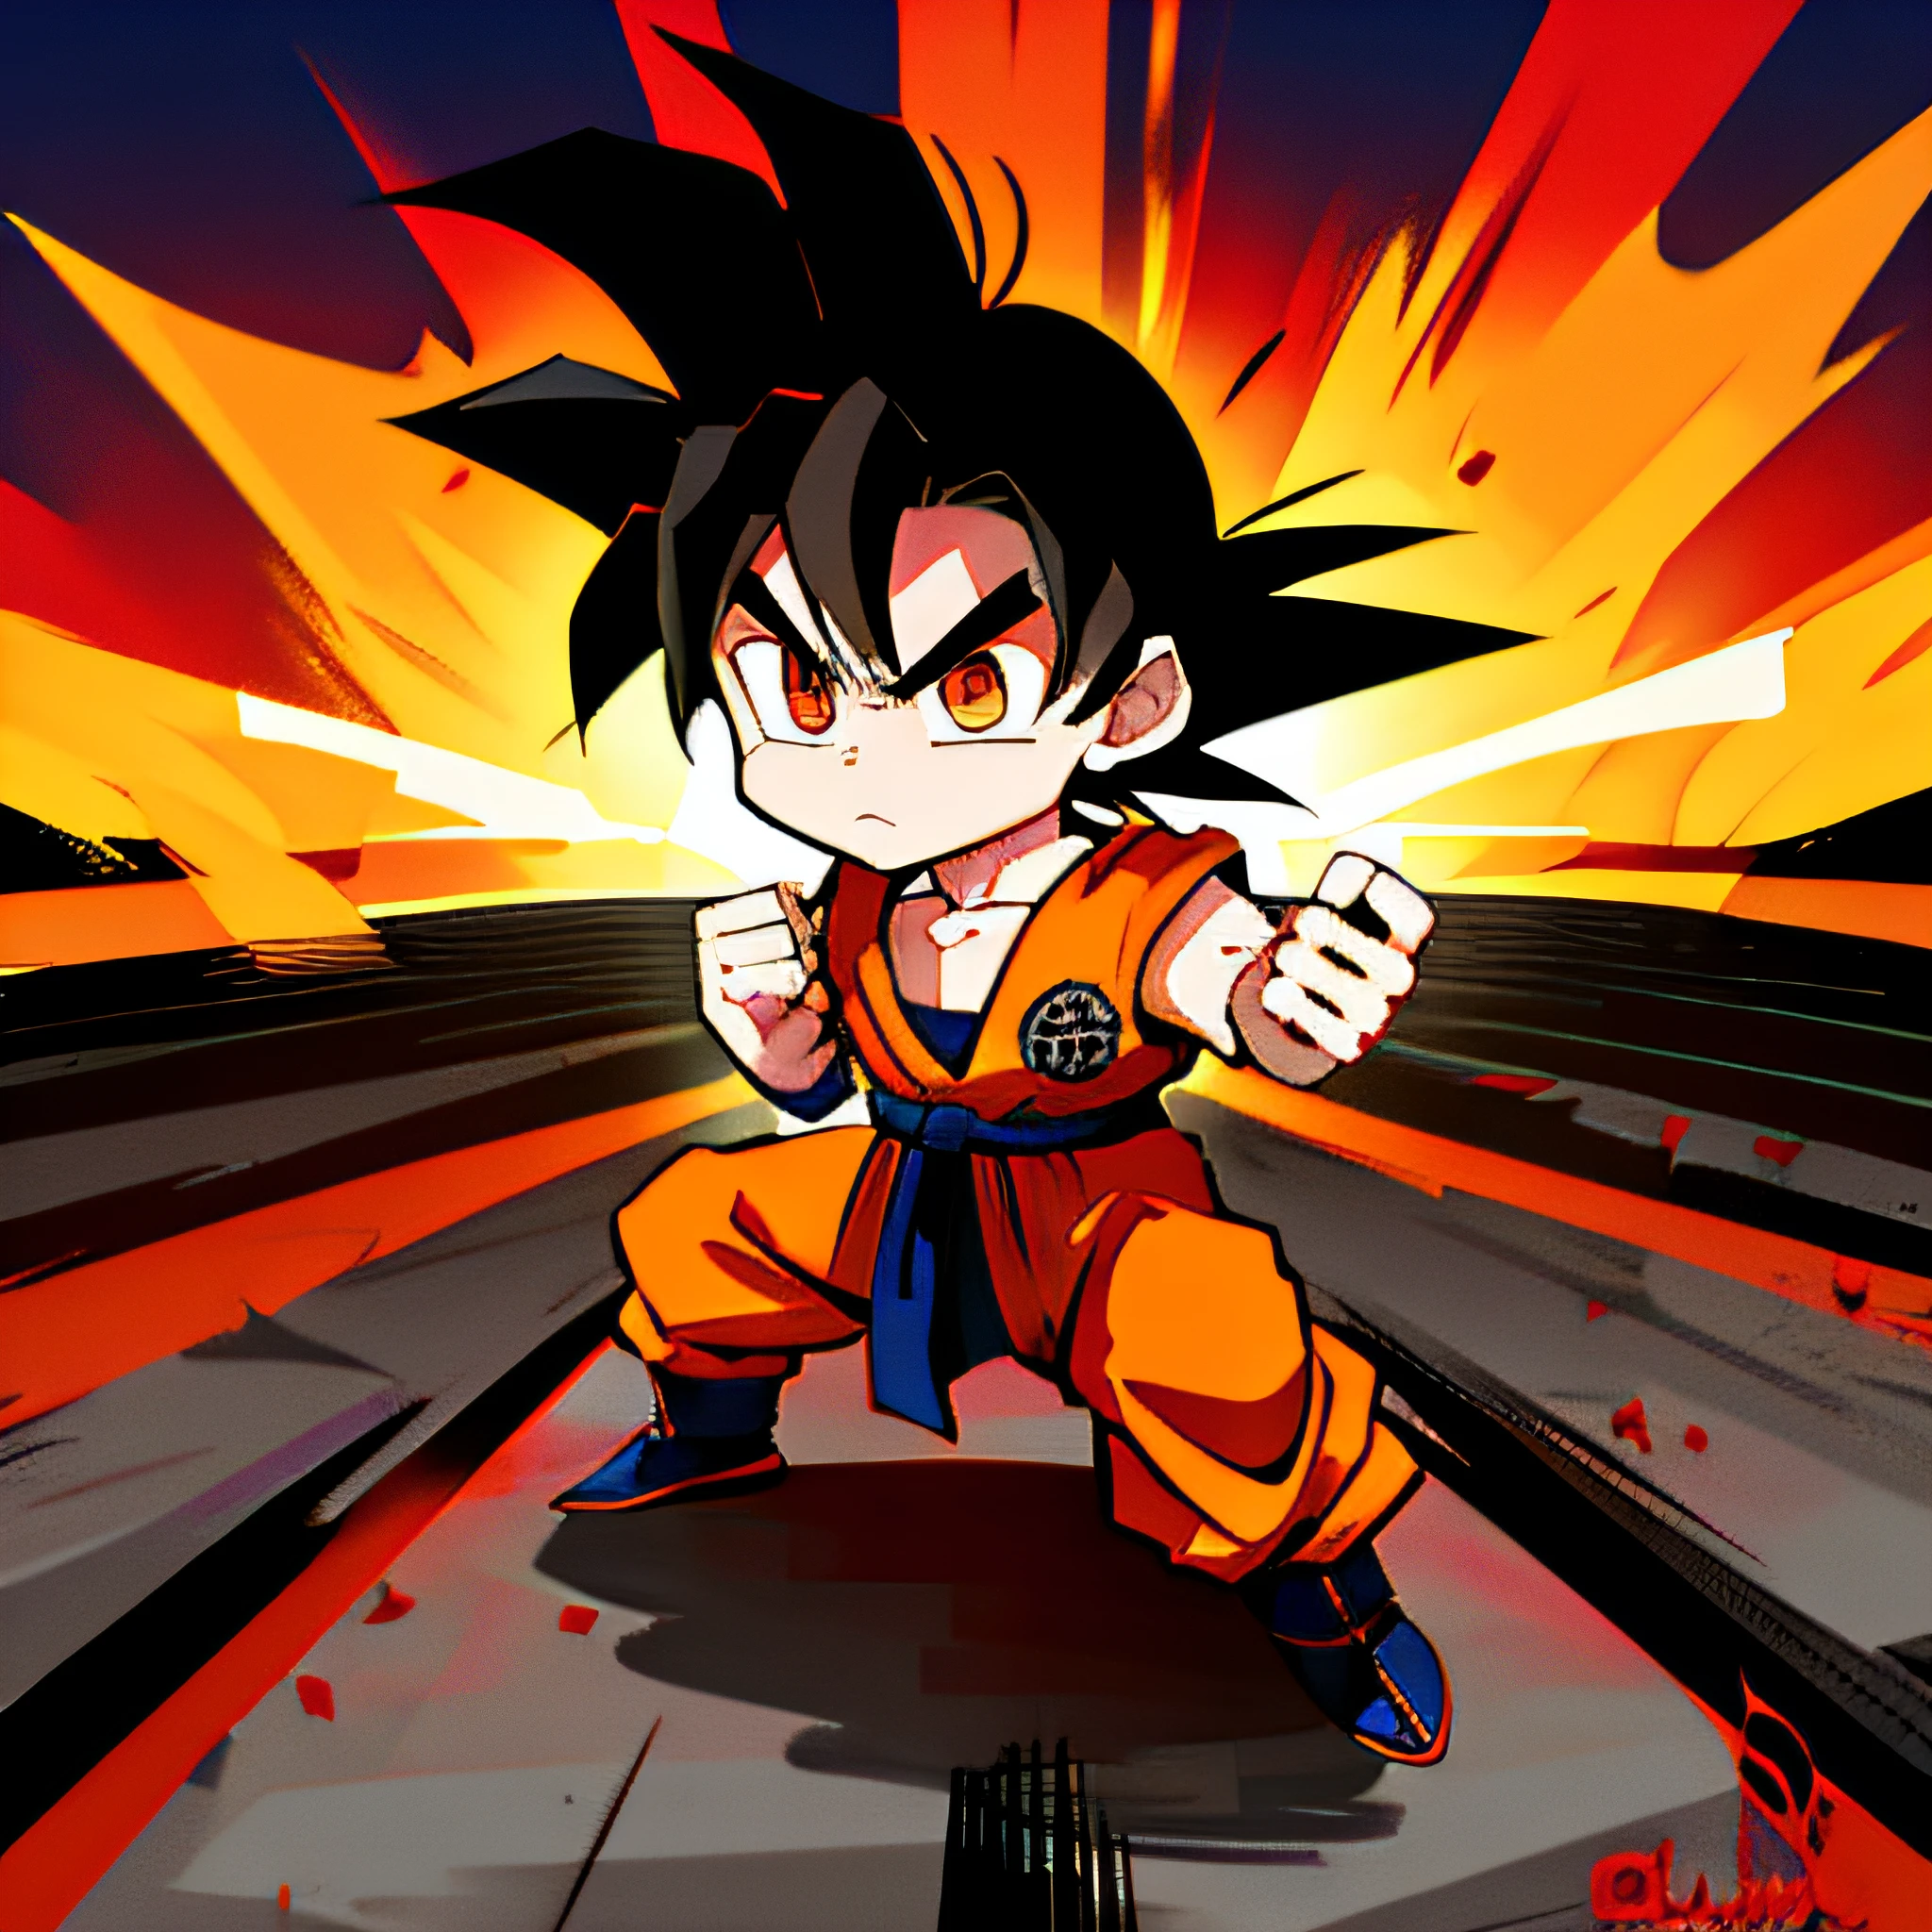 Goku chibi chara in a fighting pose, on a battlefield